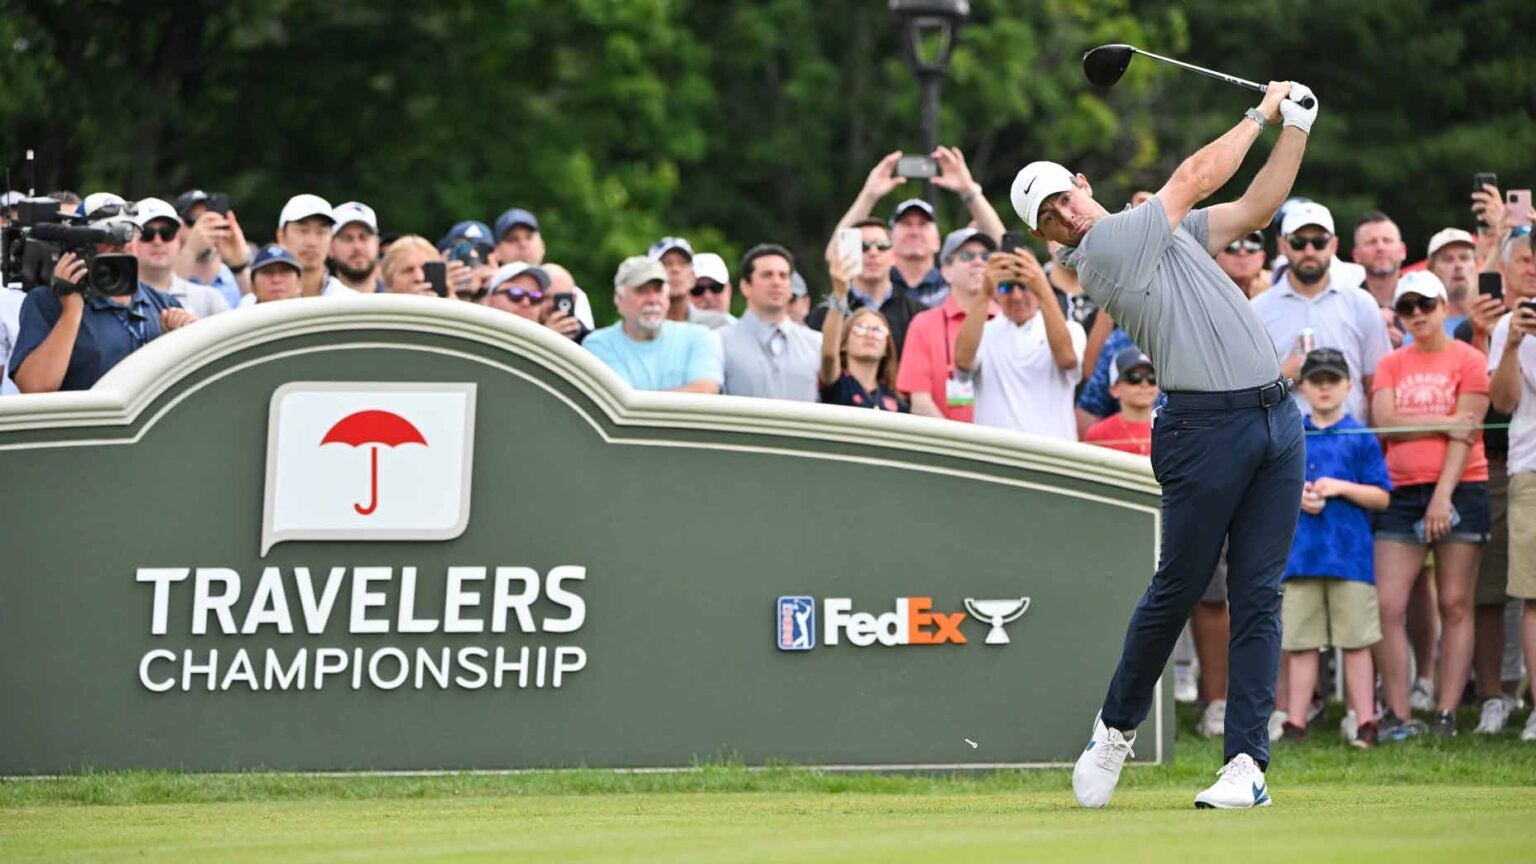 How to watch the 2022 Travelers Championship on Friday Round 2